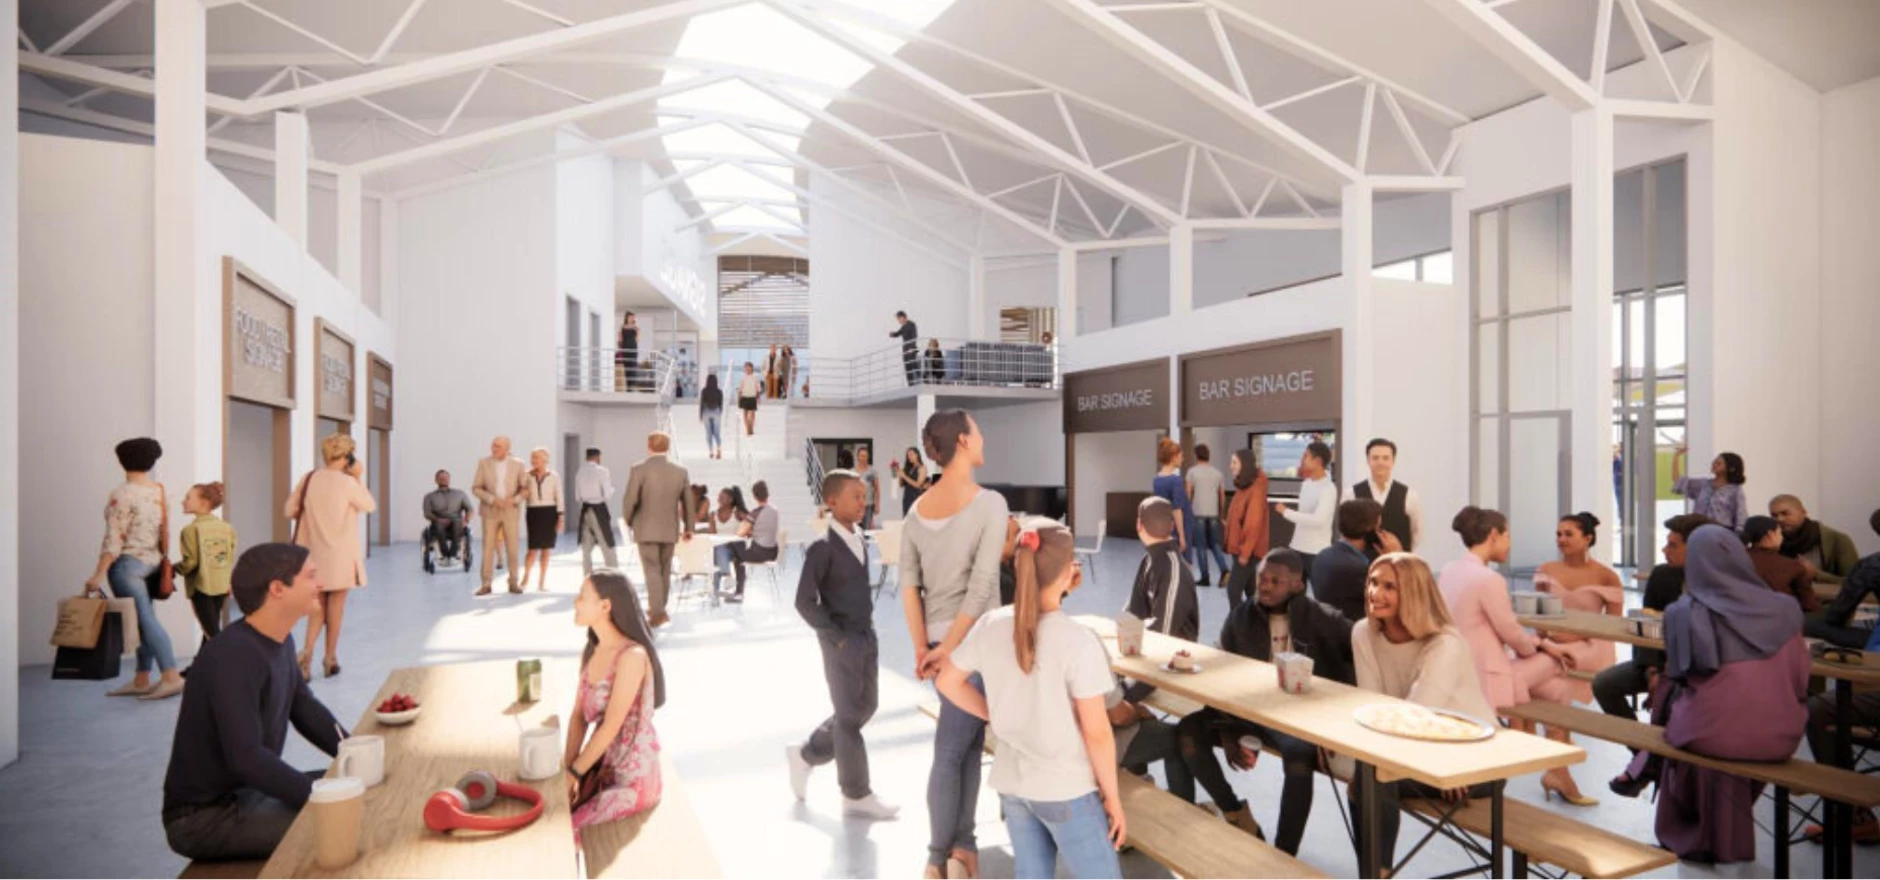 CG image of what Bacup Market could look like after redevelopment